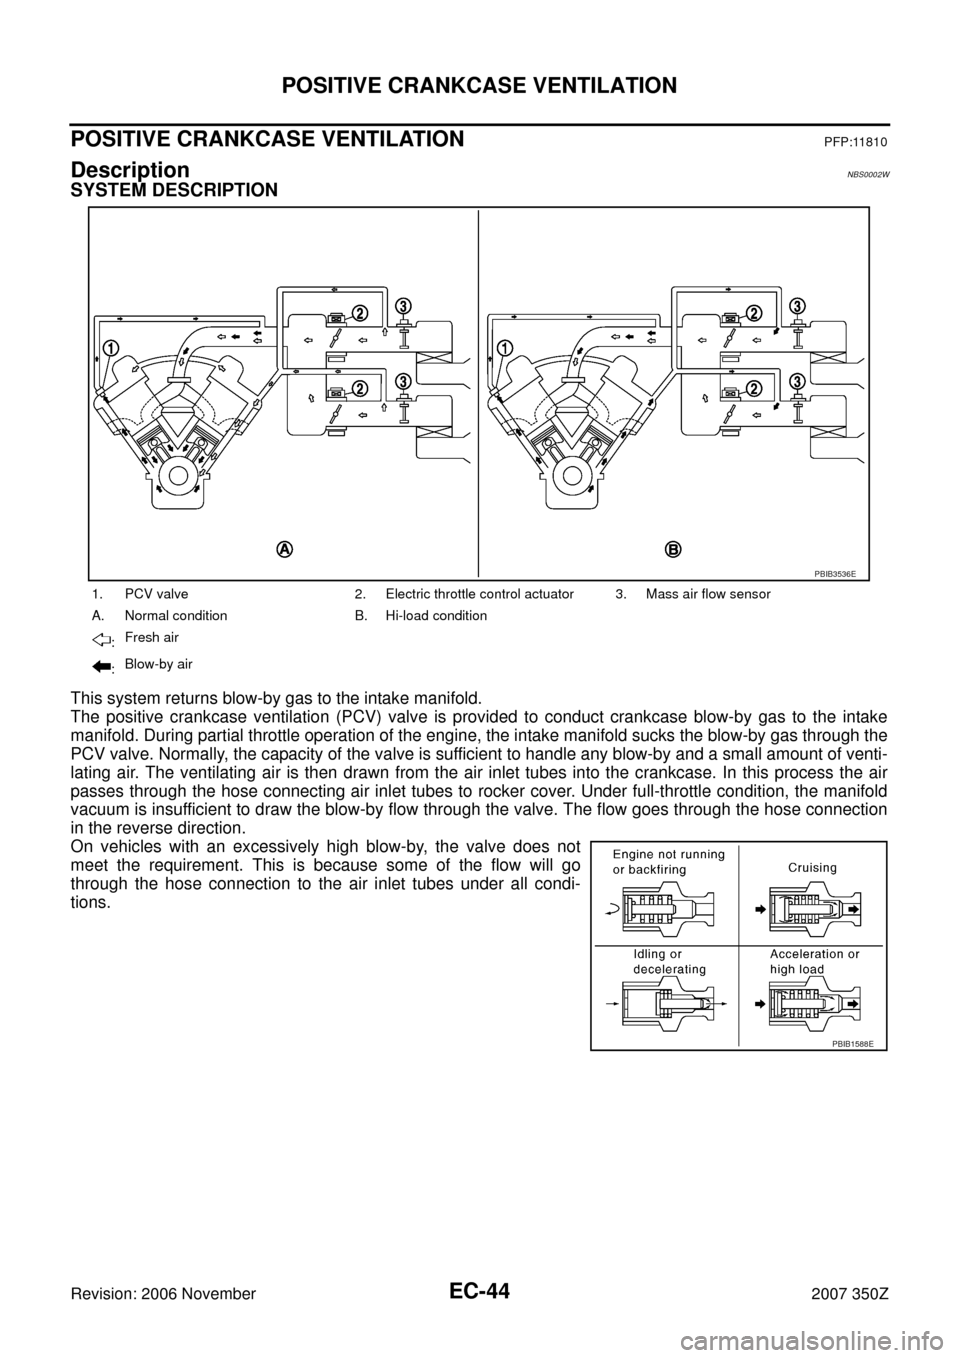 NISSAN 350Z 2007 Z33 Engine Control Service Manual EC-44
POSITIVE CRANKCASE VENTILATION
Revision: 2006 November2007 350Z
POSITIVE CRANKCASE VENTILATIONPFP:11810
DescriptionNBS0002W
SYSTEM DESCRIPTION
This system returns blow-by gas to the intake manif